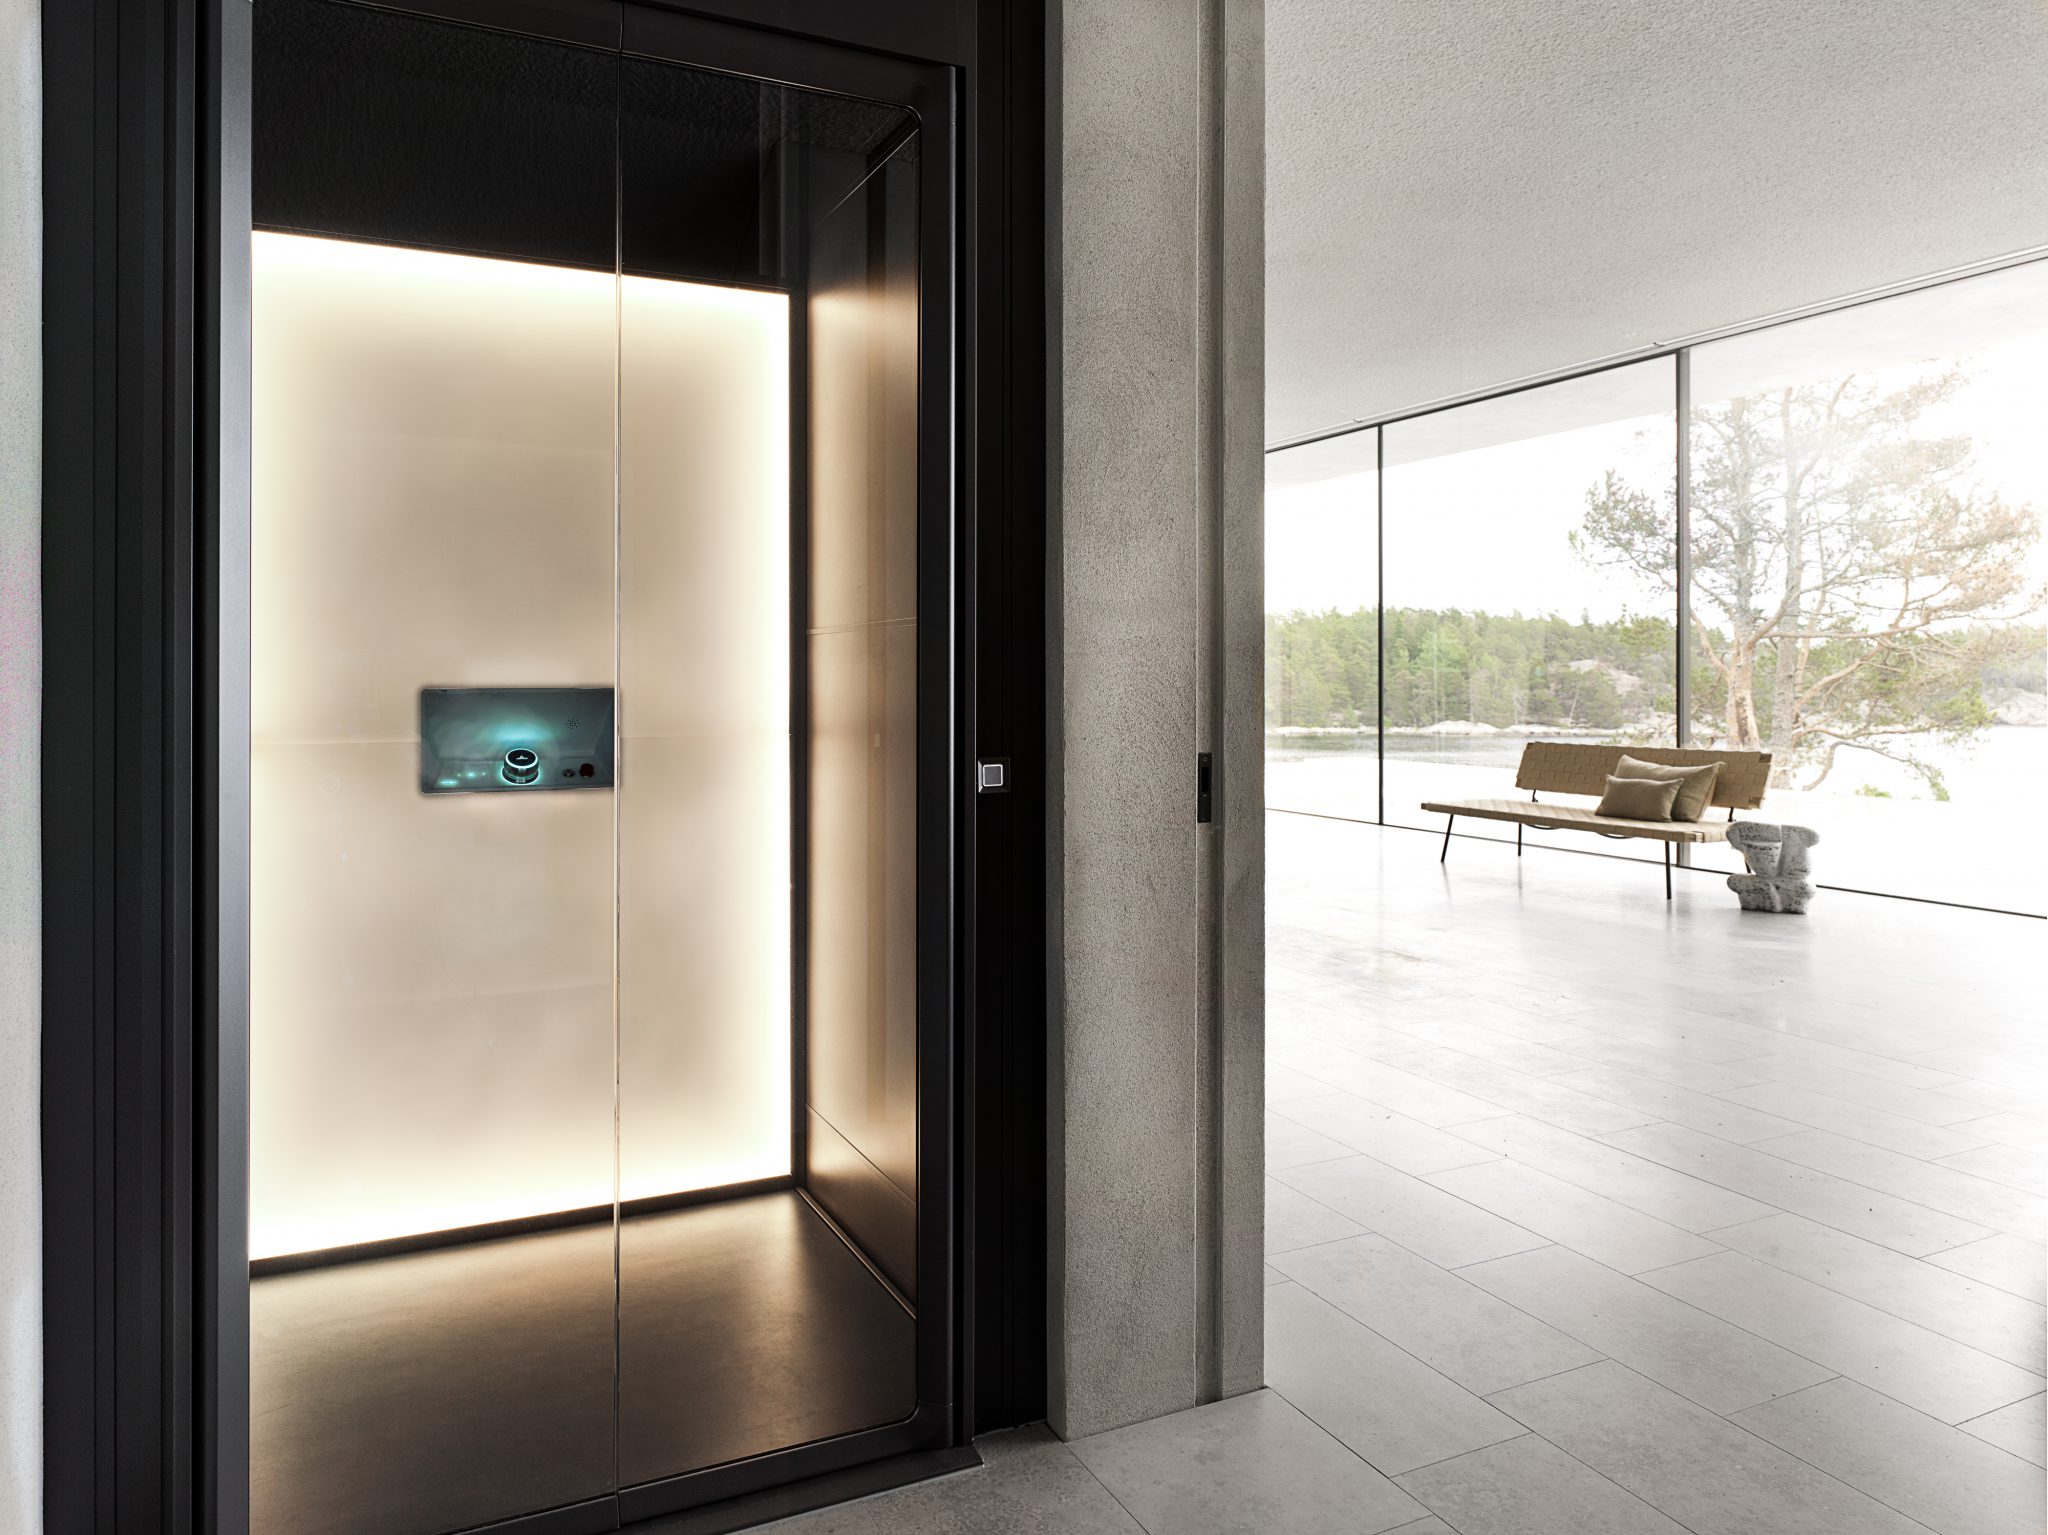 The home lift Aritco HomeLift in a beautiful home in Sweden